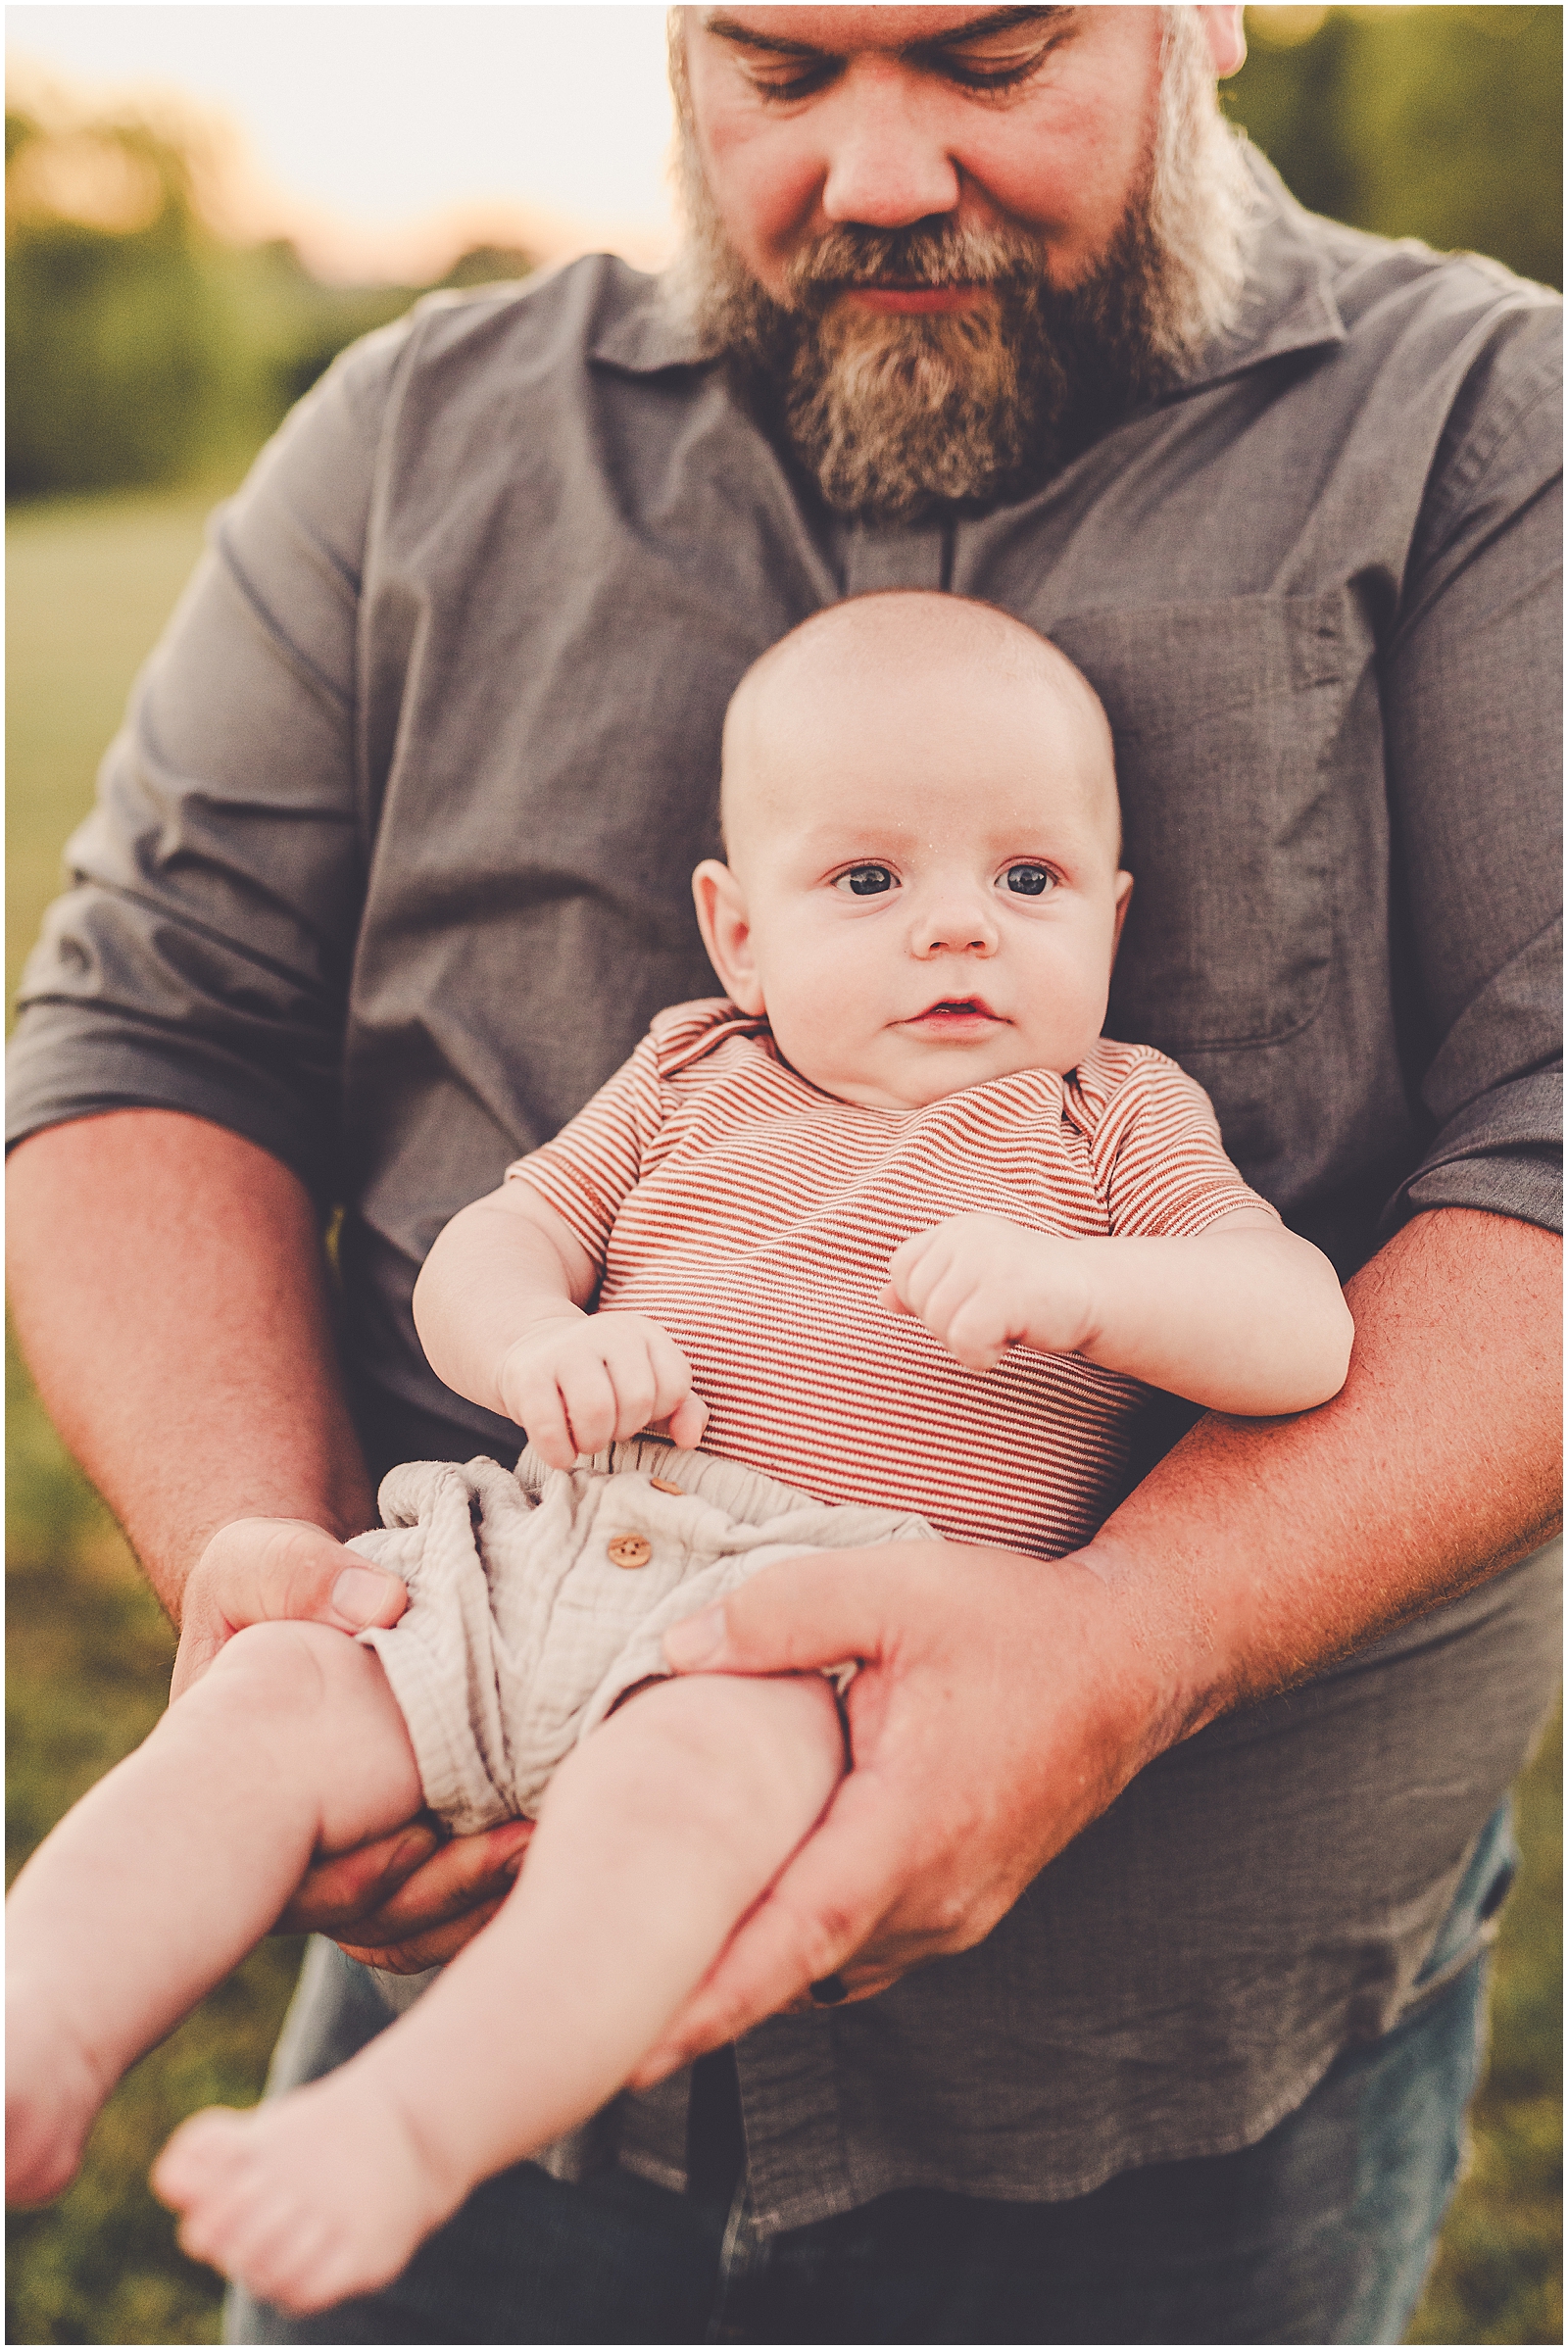 Central Illinois sunset family & milestone photography for the Evans family with Bourbonnais family photographer Kara Evans Photographer.